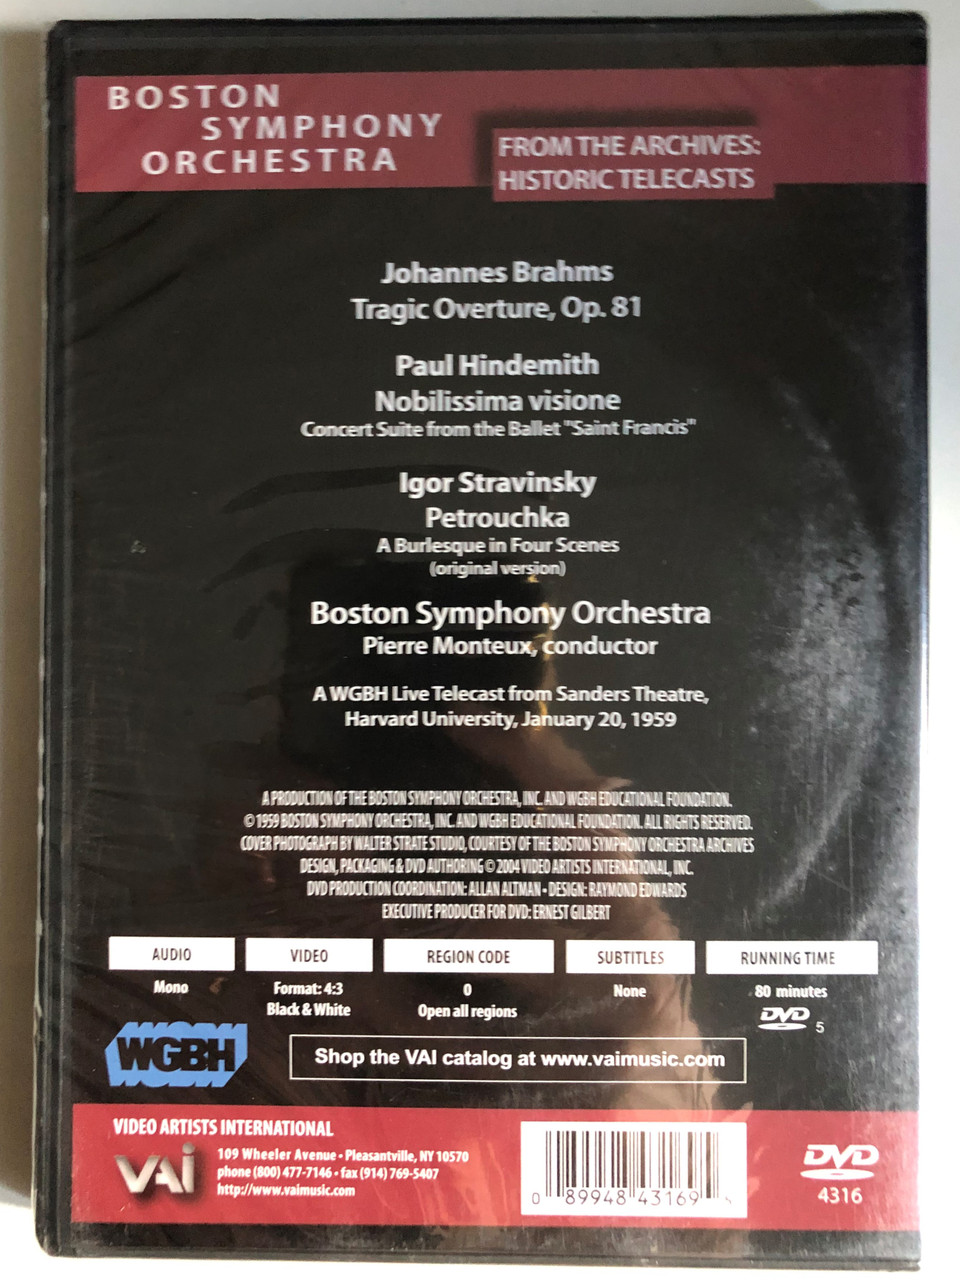 Brahms_Hindemith_Stravinsky_Pierre_Monteux_Boston_Symphony_Orchestra_Conductor_Pierre_Monteux_FROM_THE_ARCHIVES_HISTORIC_TELECASTS_AWGBH_Live_Telecast_from_Sanders_Theatre_3__03746.1691730010.1280.1280.JPG (960×1280)